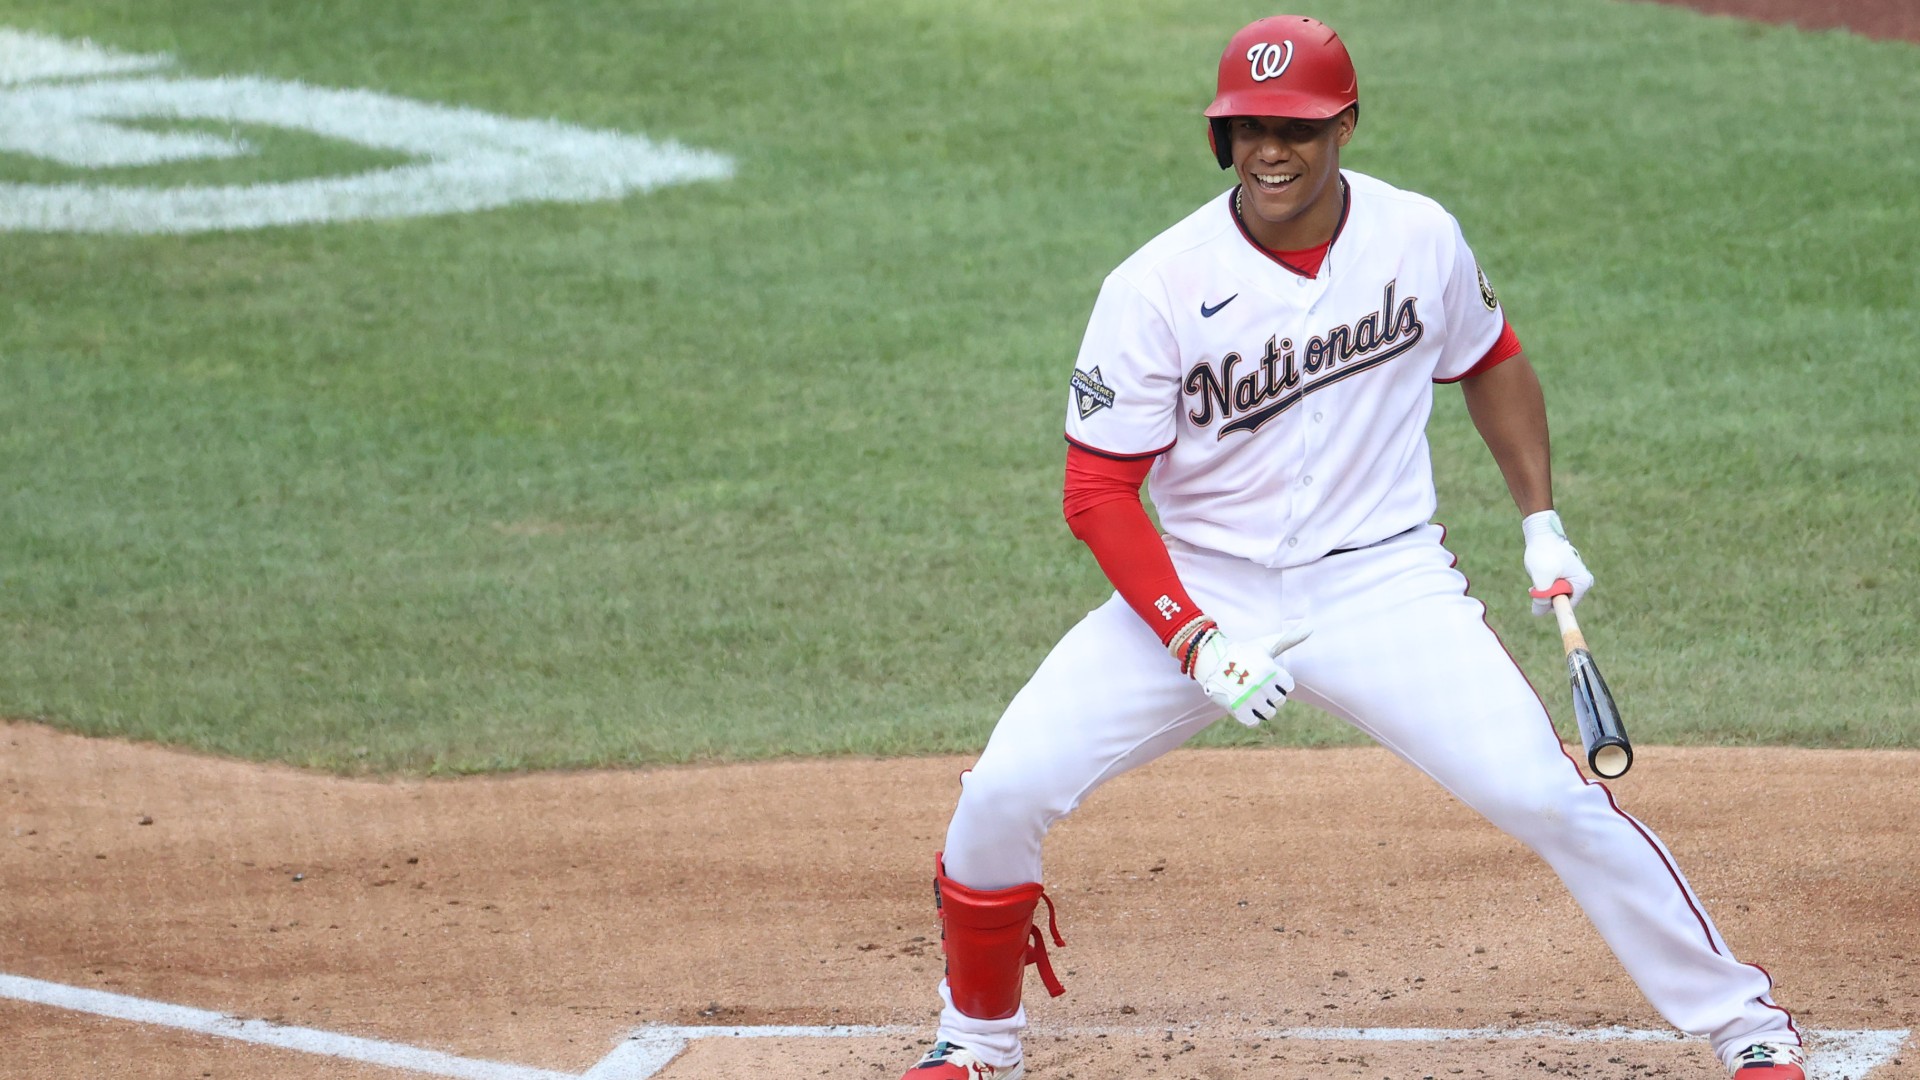 Juan Soto Impressed in His First Game Back But Is Still Working Up to Full Strength